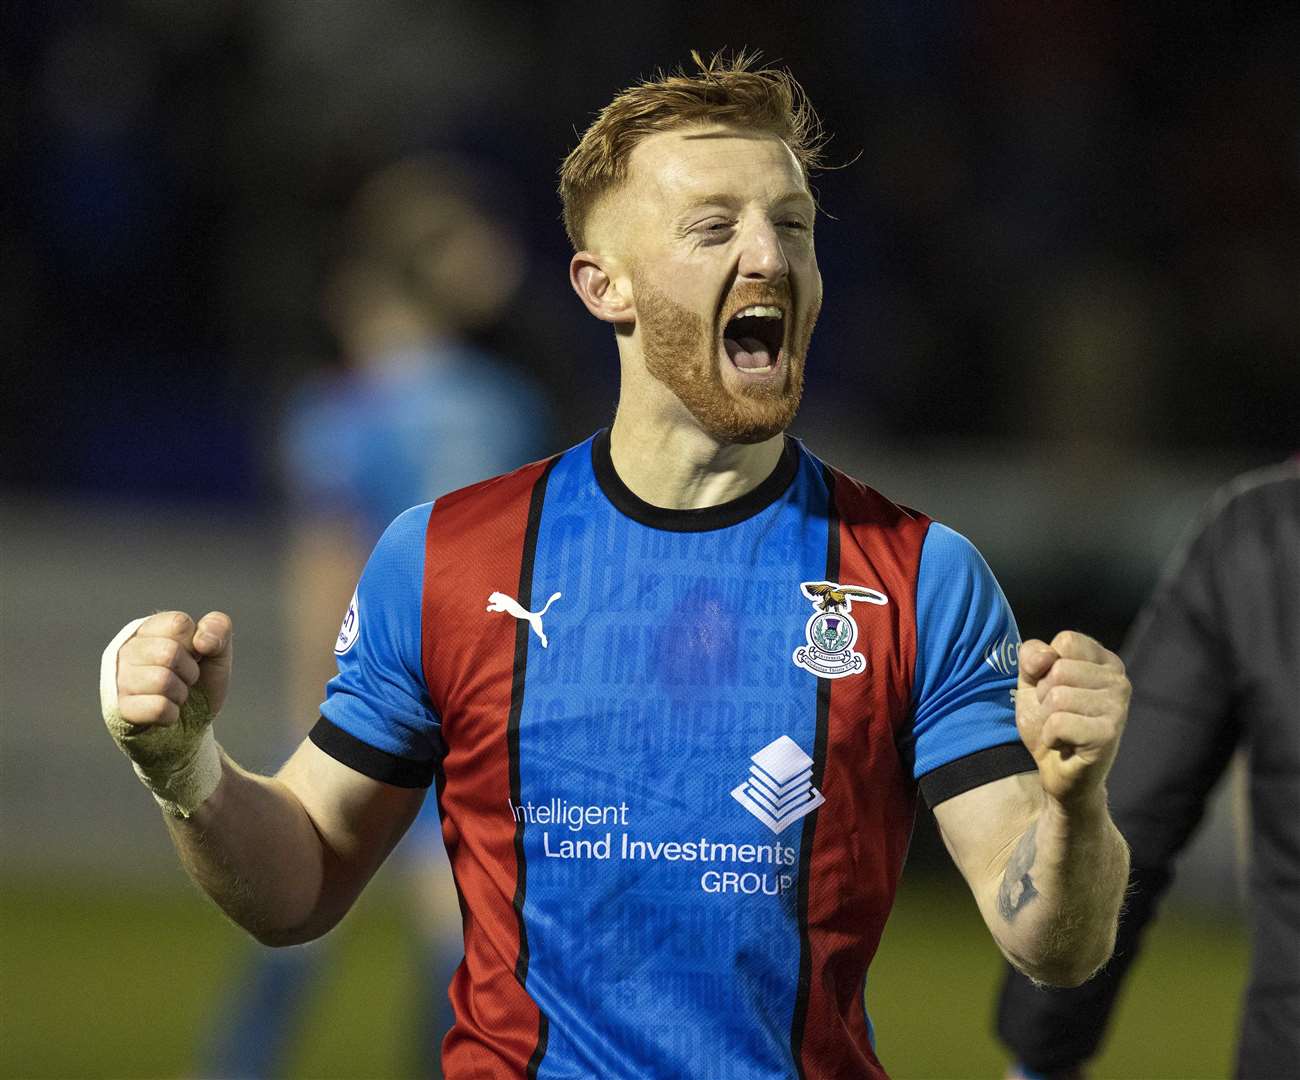 David Carson shows his delight after Caley Thistle's Scottish Cup quarter-final win against Kilmarnock